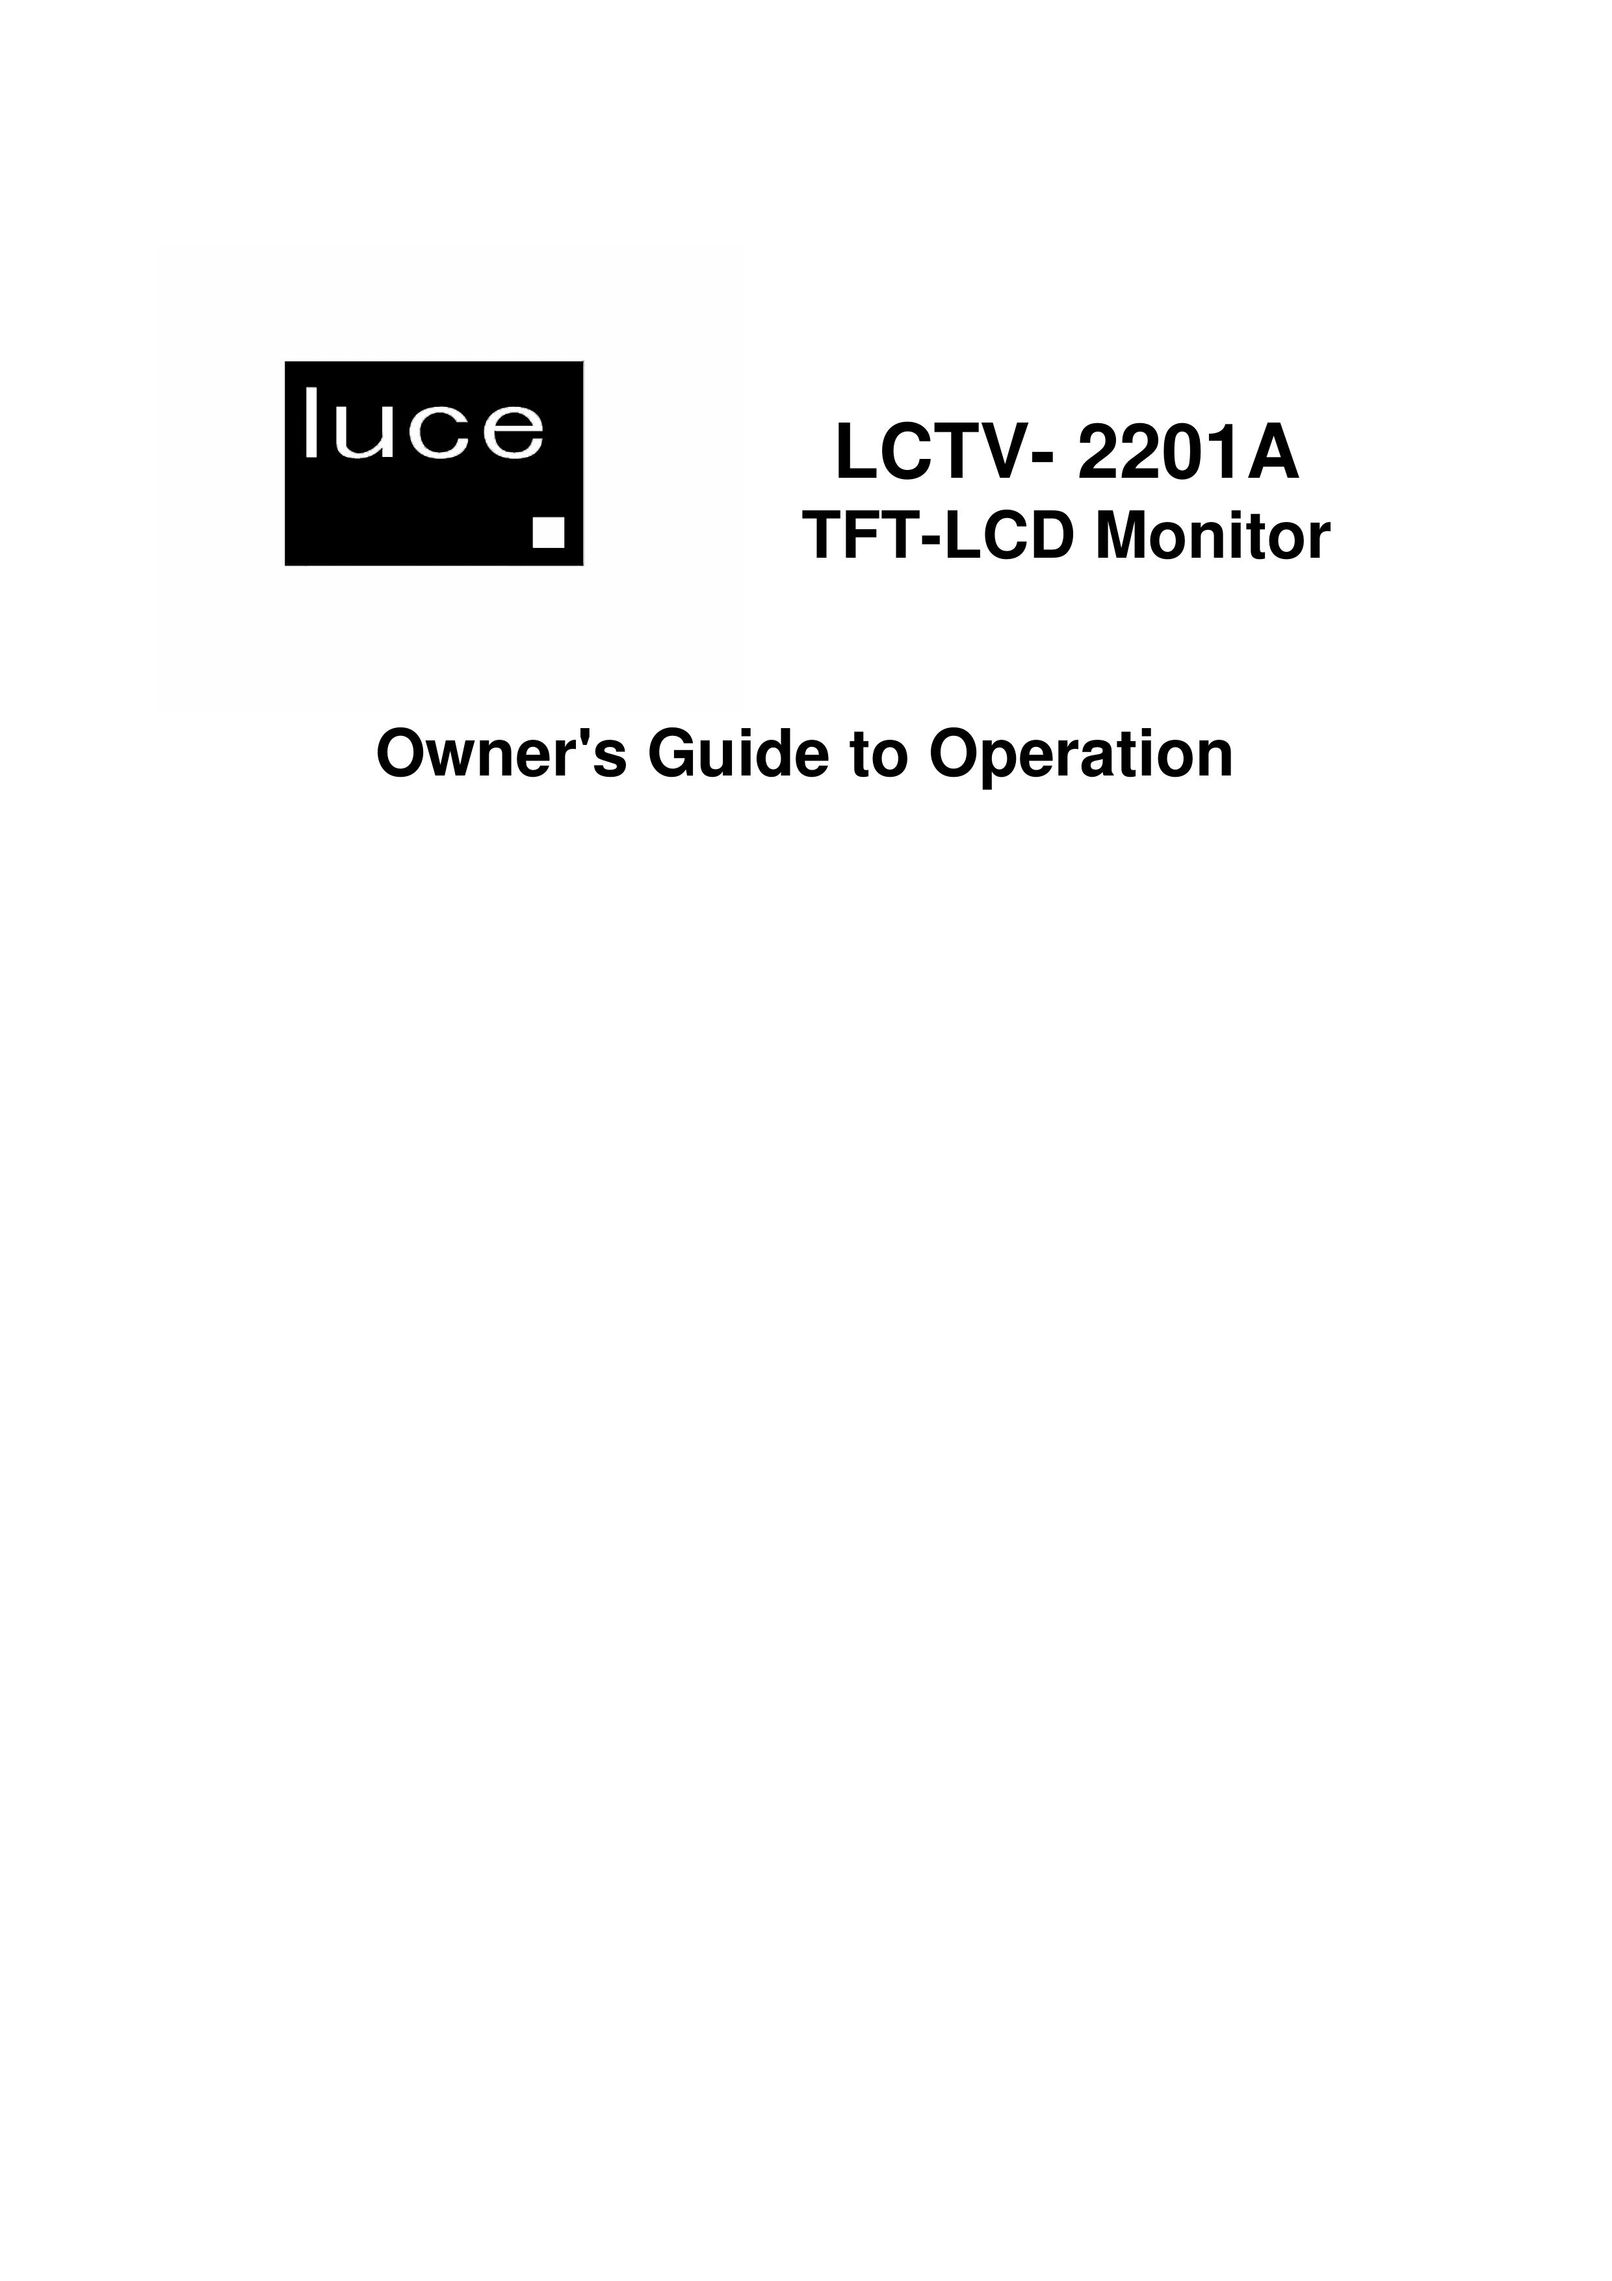 Luce LCTV-2201A Flat Panel Television User Manual